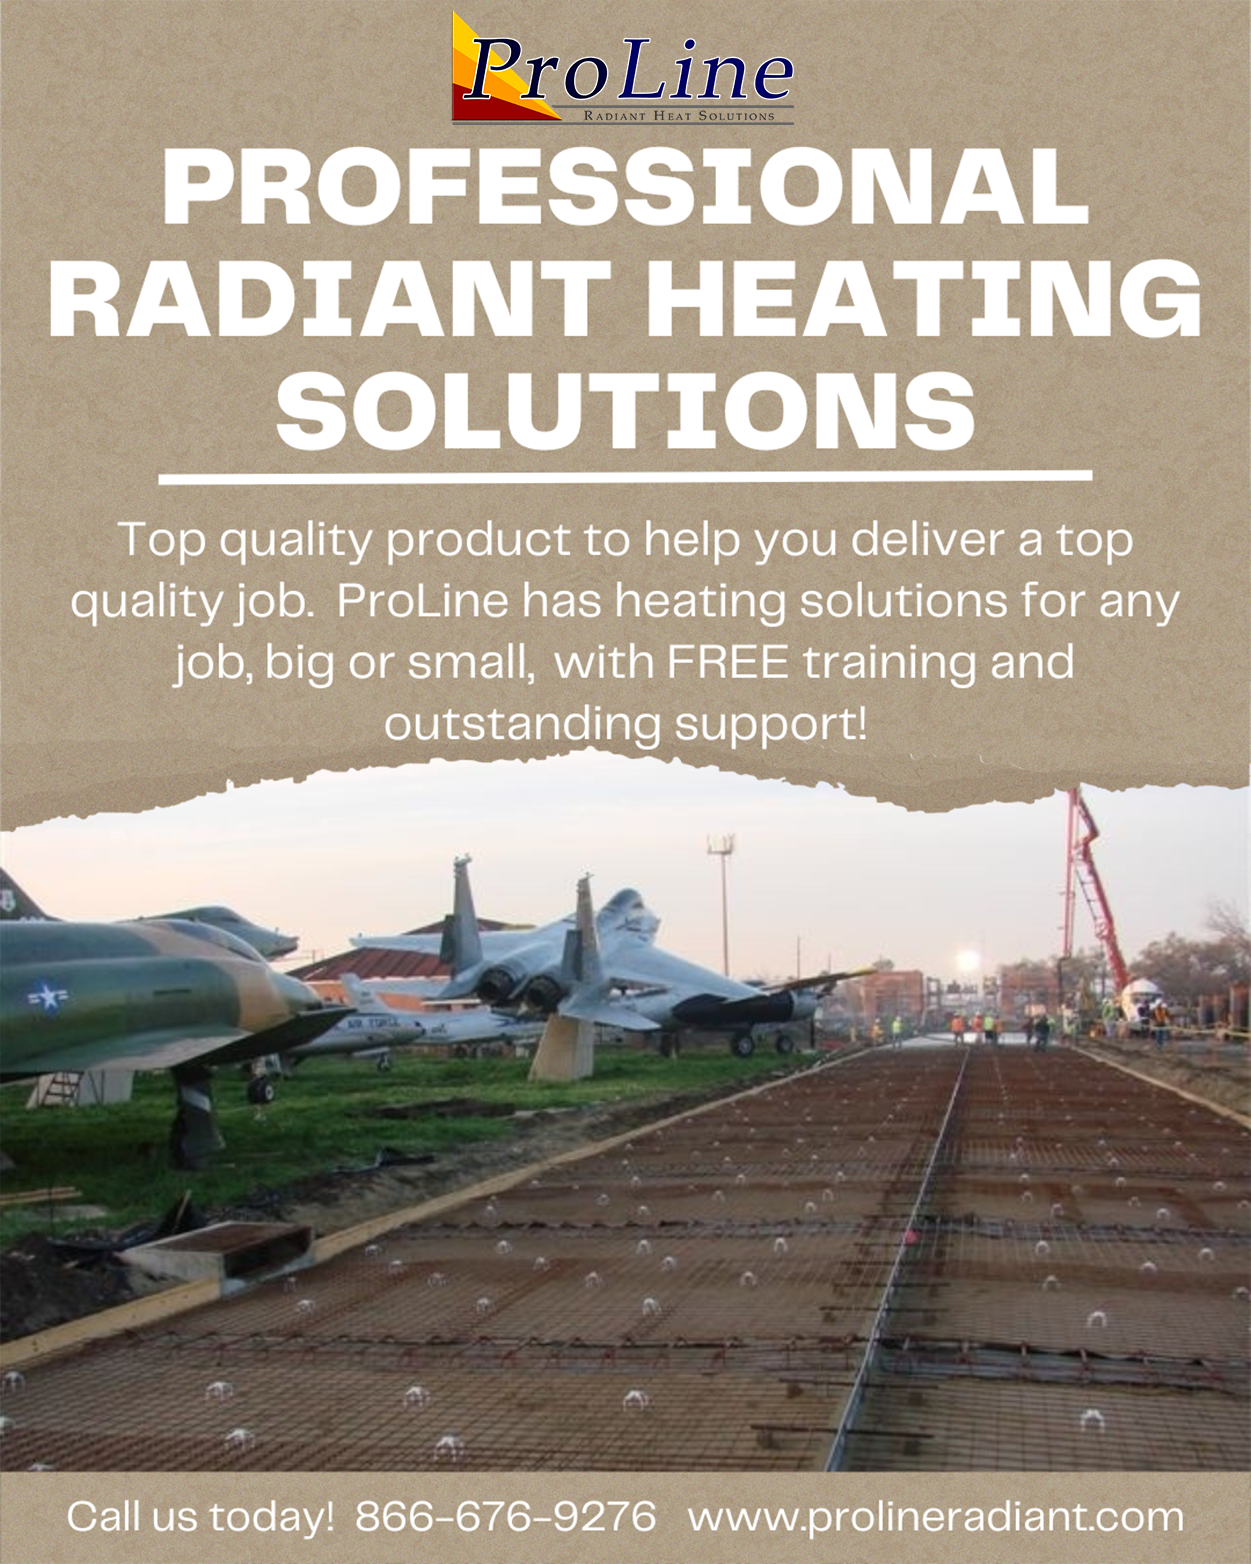 Professional radiant heat solutions and support services.